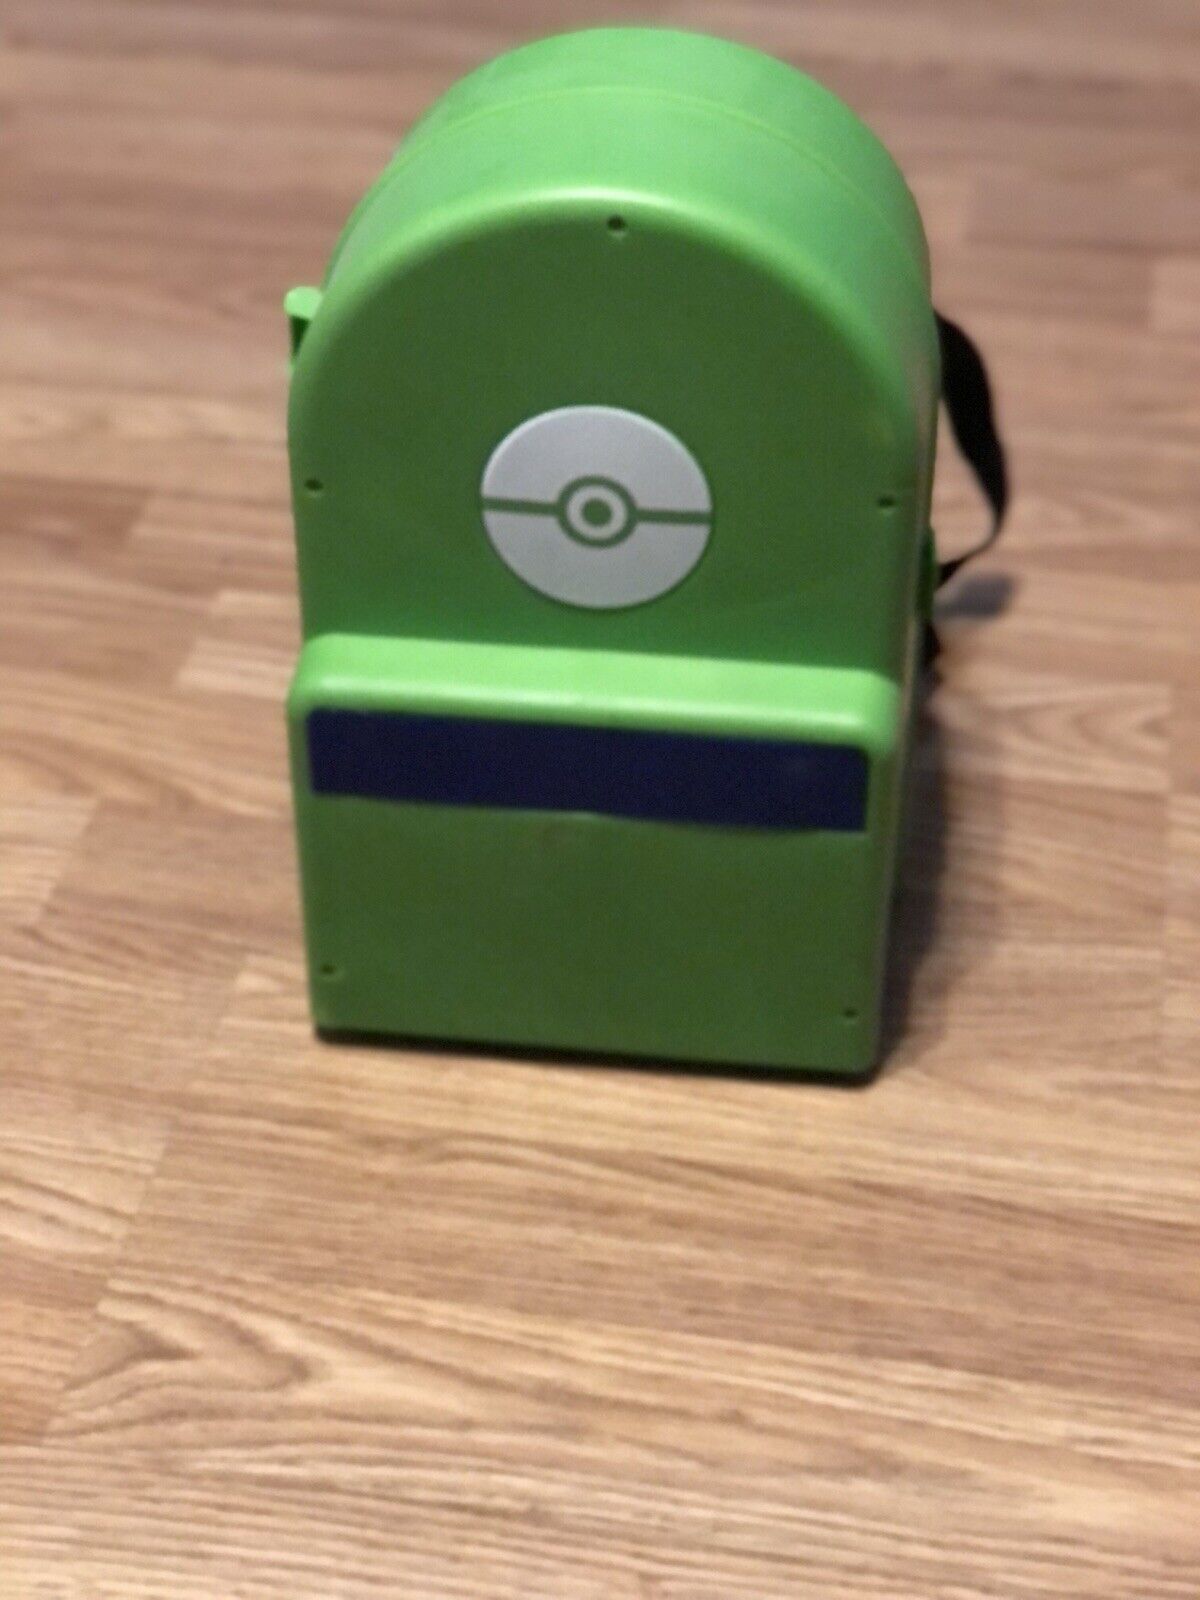 2020 POKEMON CARRYING CASE PLAYSET /GREEN HARD PLASTIC BACKPACK Used No Figures